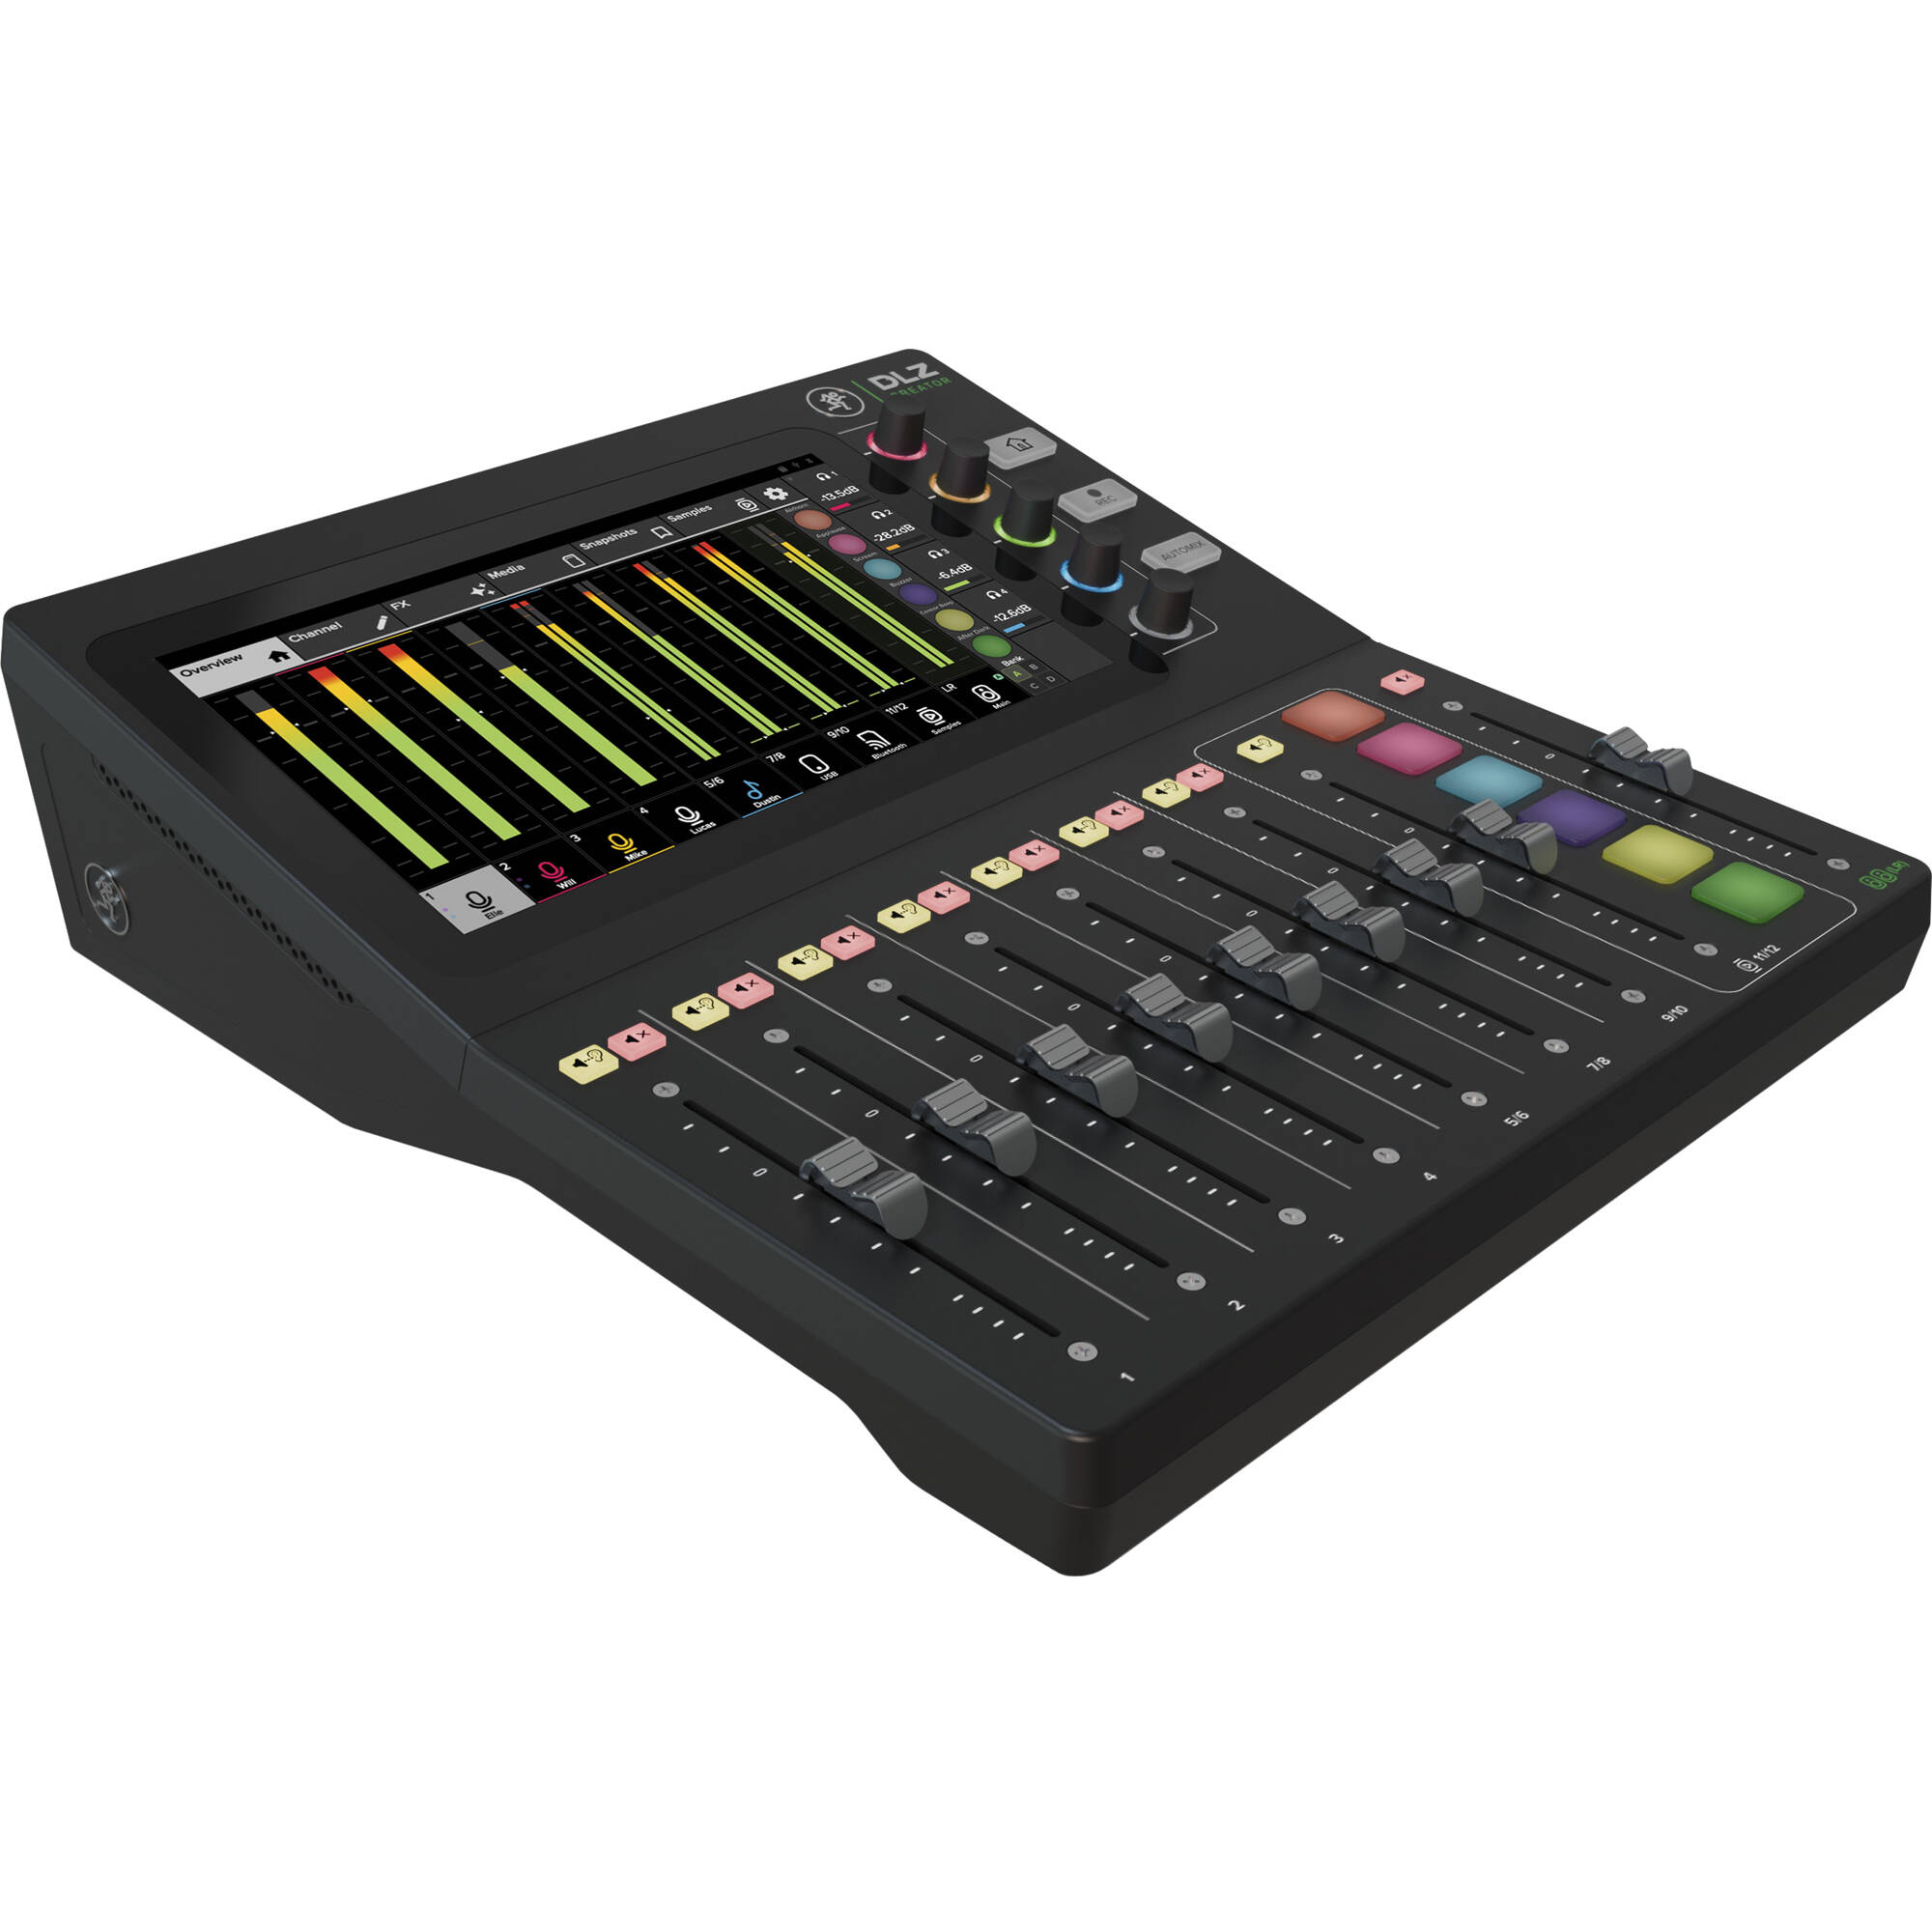 Mackie DLZ CREATOR  Adaptive Digital Mixer for Podcasting and Streaming